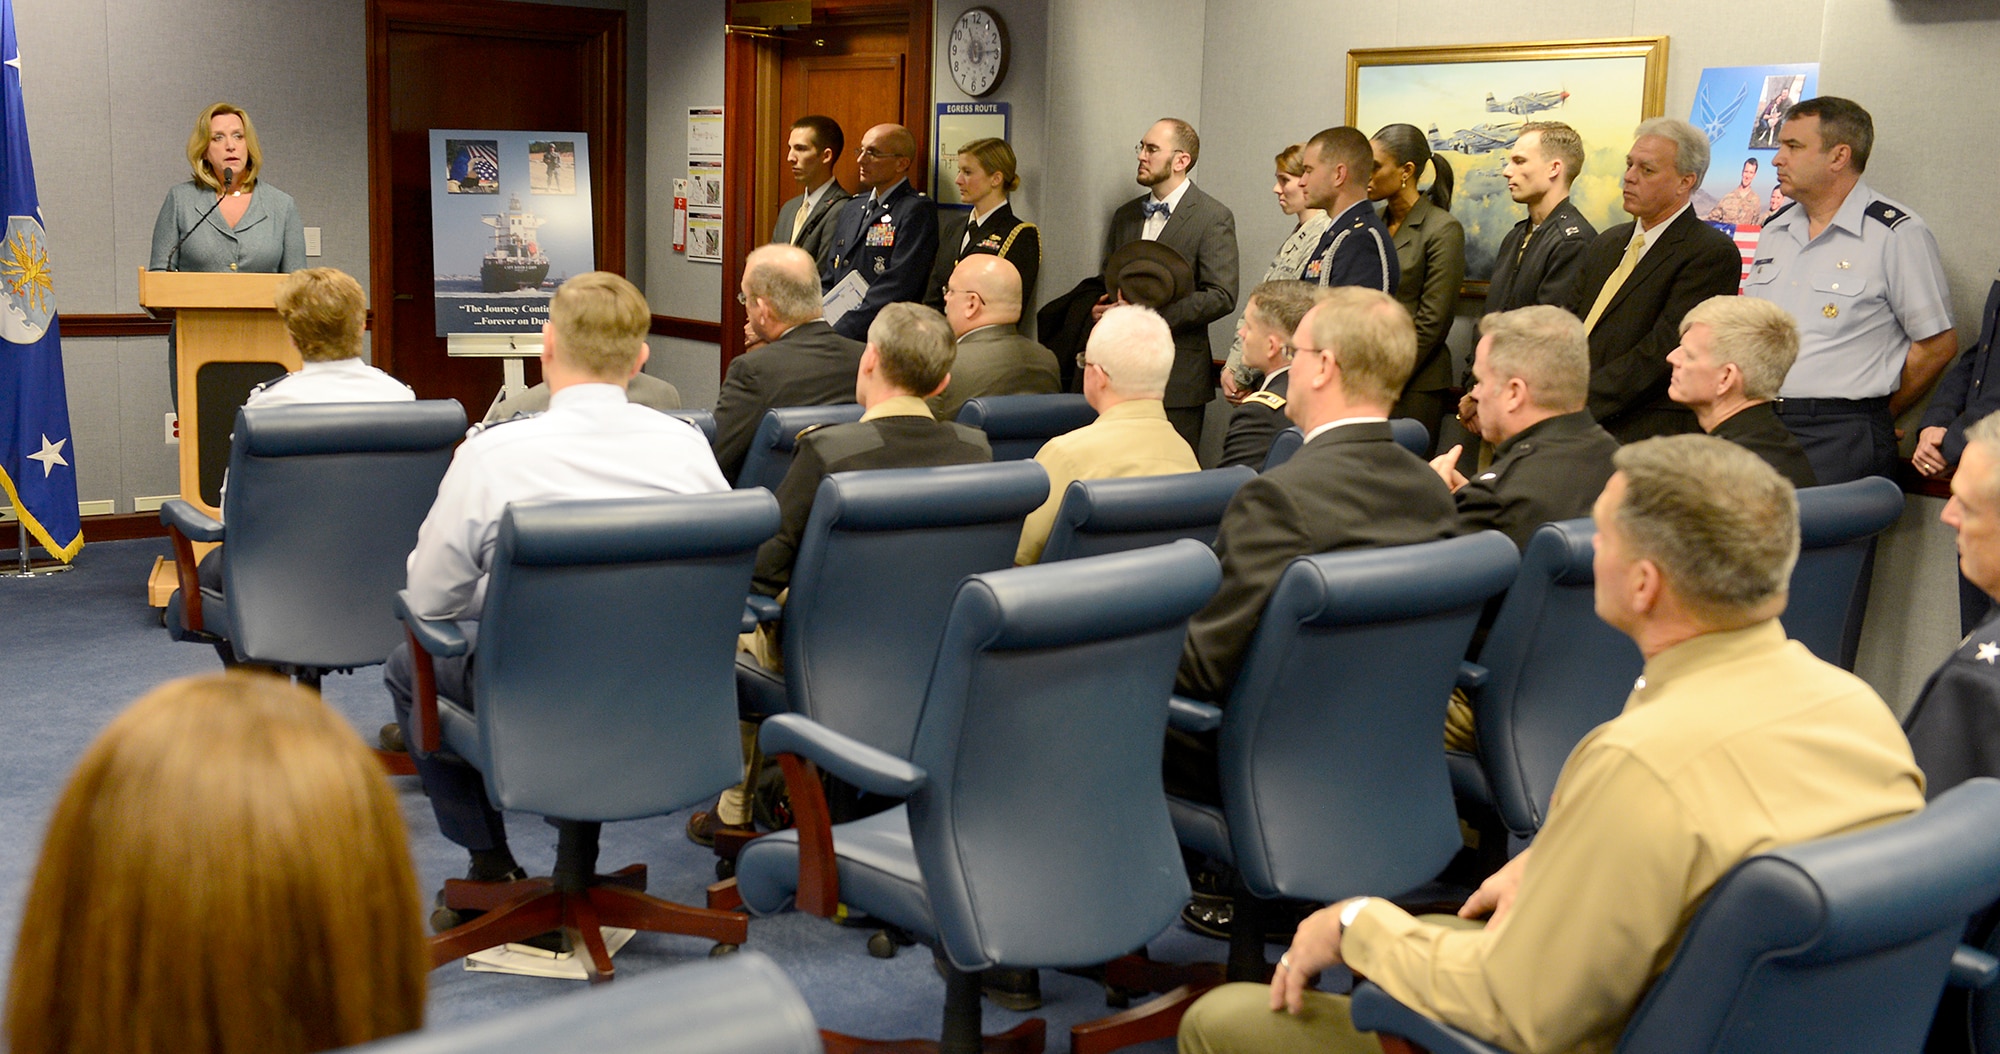 Secretary of the Air Force Deborah Lee James speaks during the naming ceremony of the Motor Vessel Capt. David I. Lyon, Jan. 14, 2015, in the Pentagon.  The vessel was named in honor of Capt. David Lyon, who was killed in action Dec. 27, 2013, while serving in support of Operation Enduring Freedom.  (U.S. Air Force photo/Scott M. Ash)